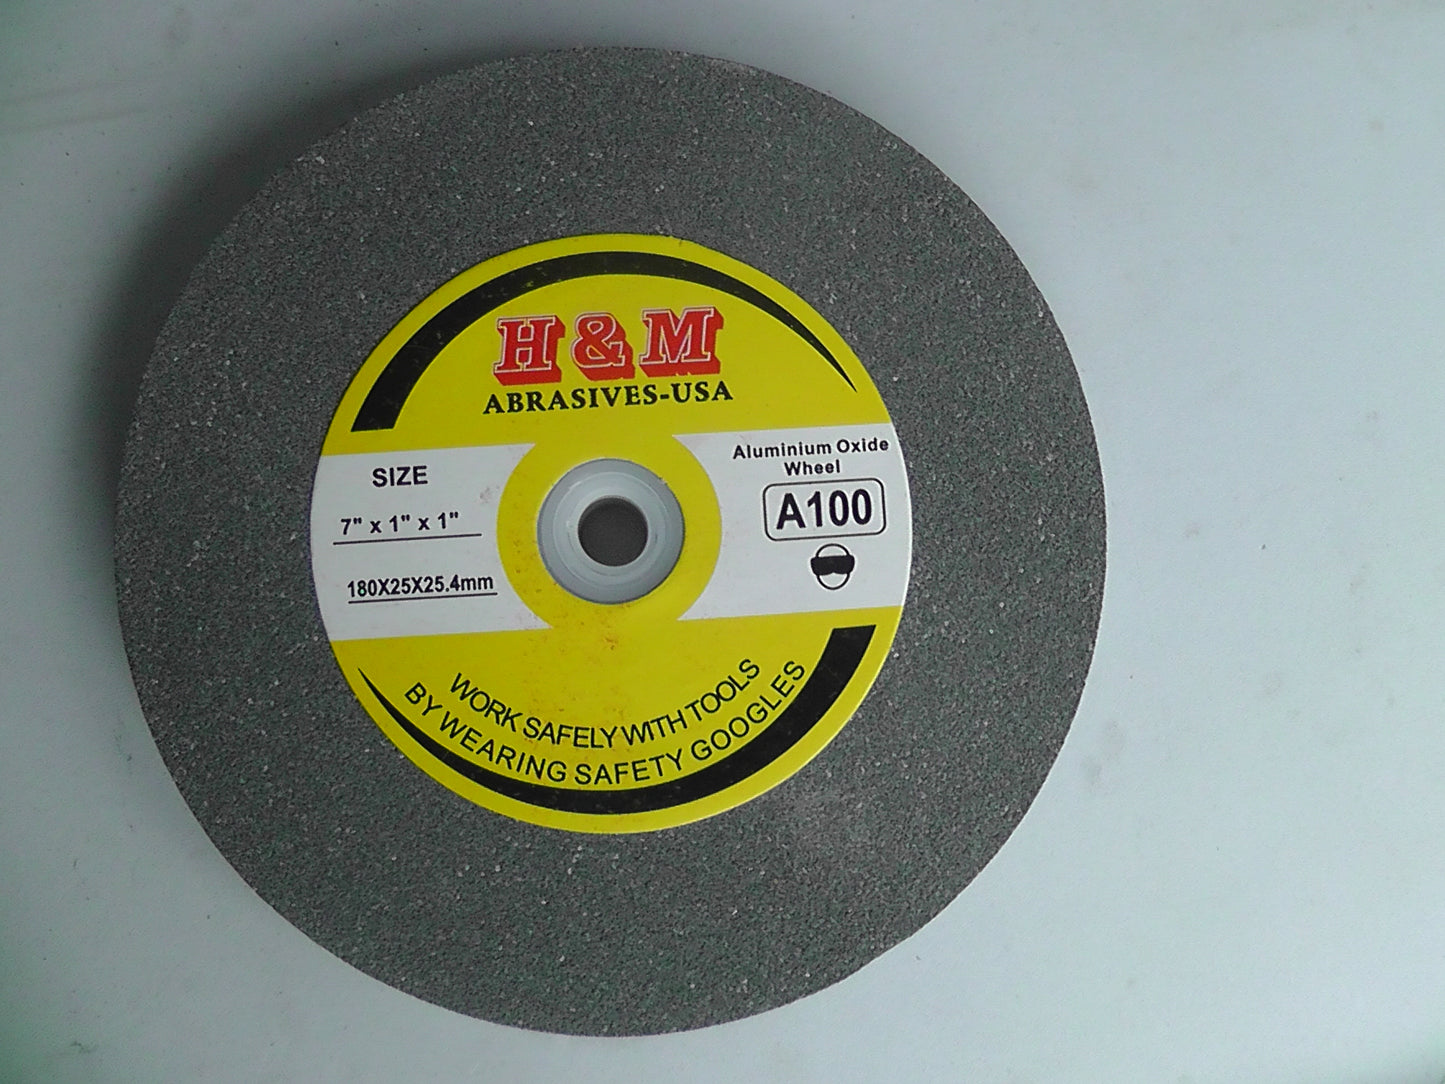 7 inch BENCH GRINDING WHEEL VITRIFIED 7" x 1" x 1" A/O IN 46 60 100 Grit Bench Grinder